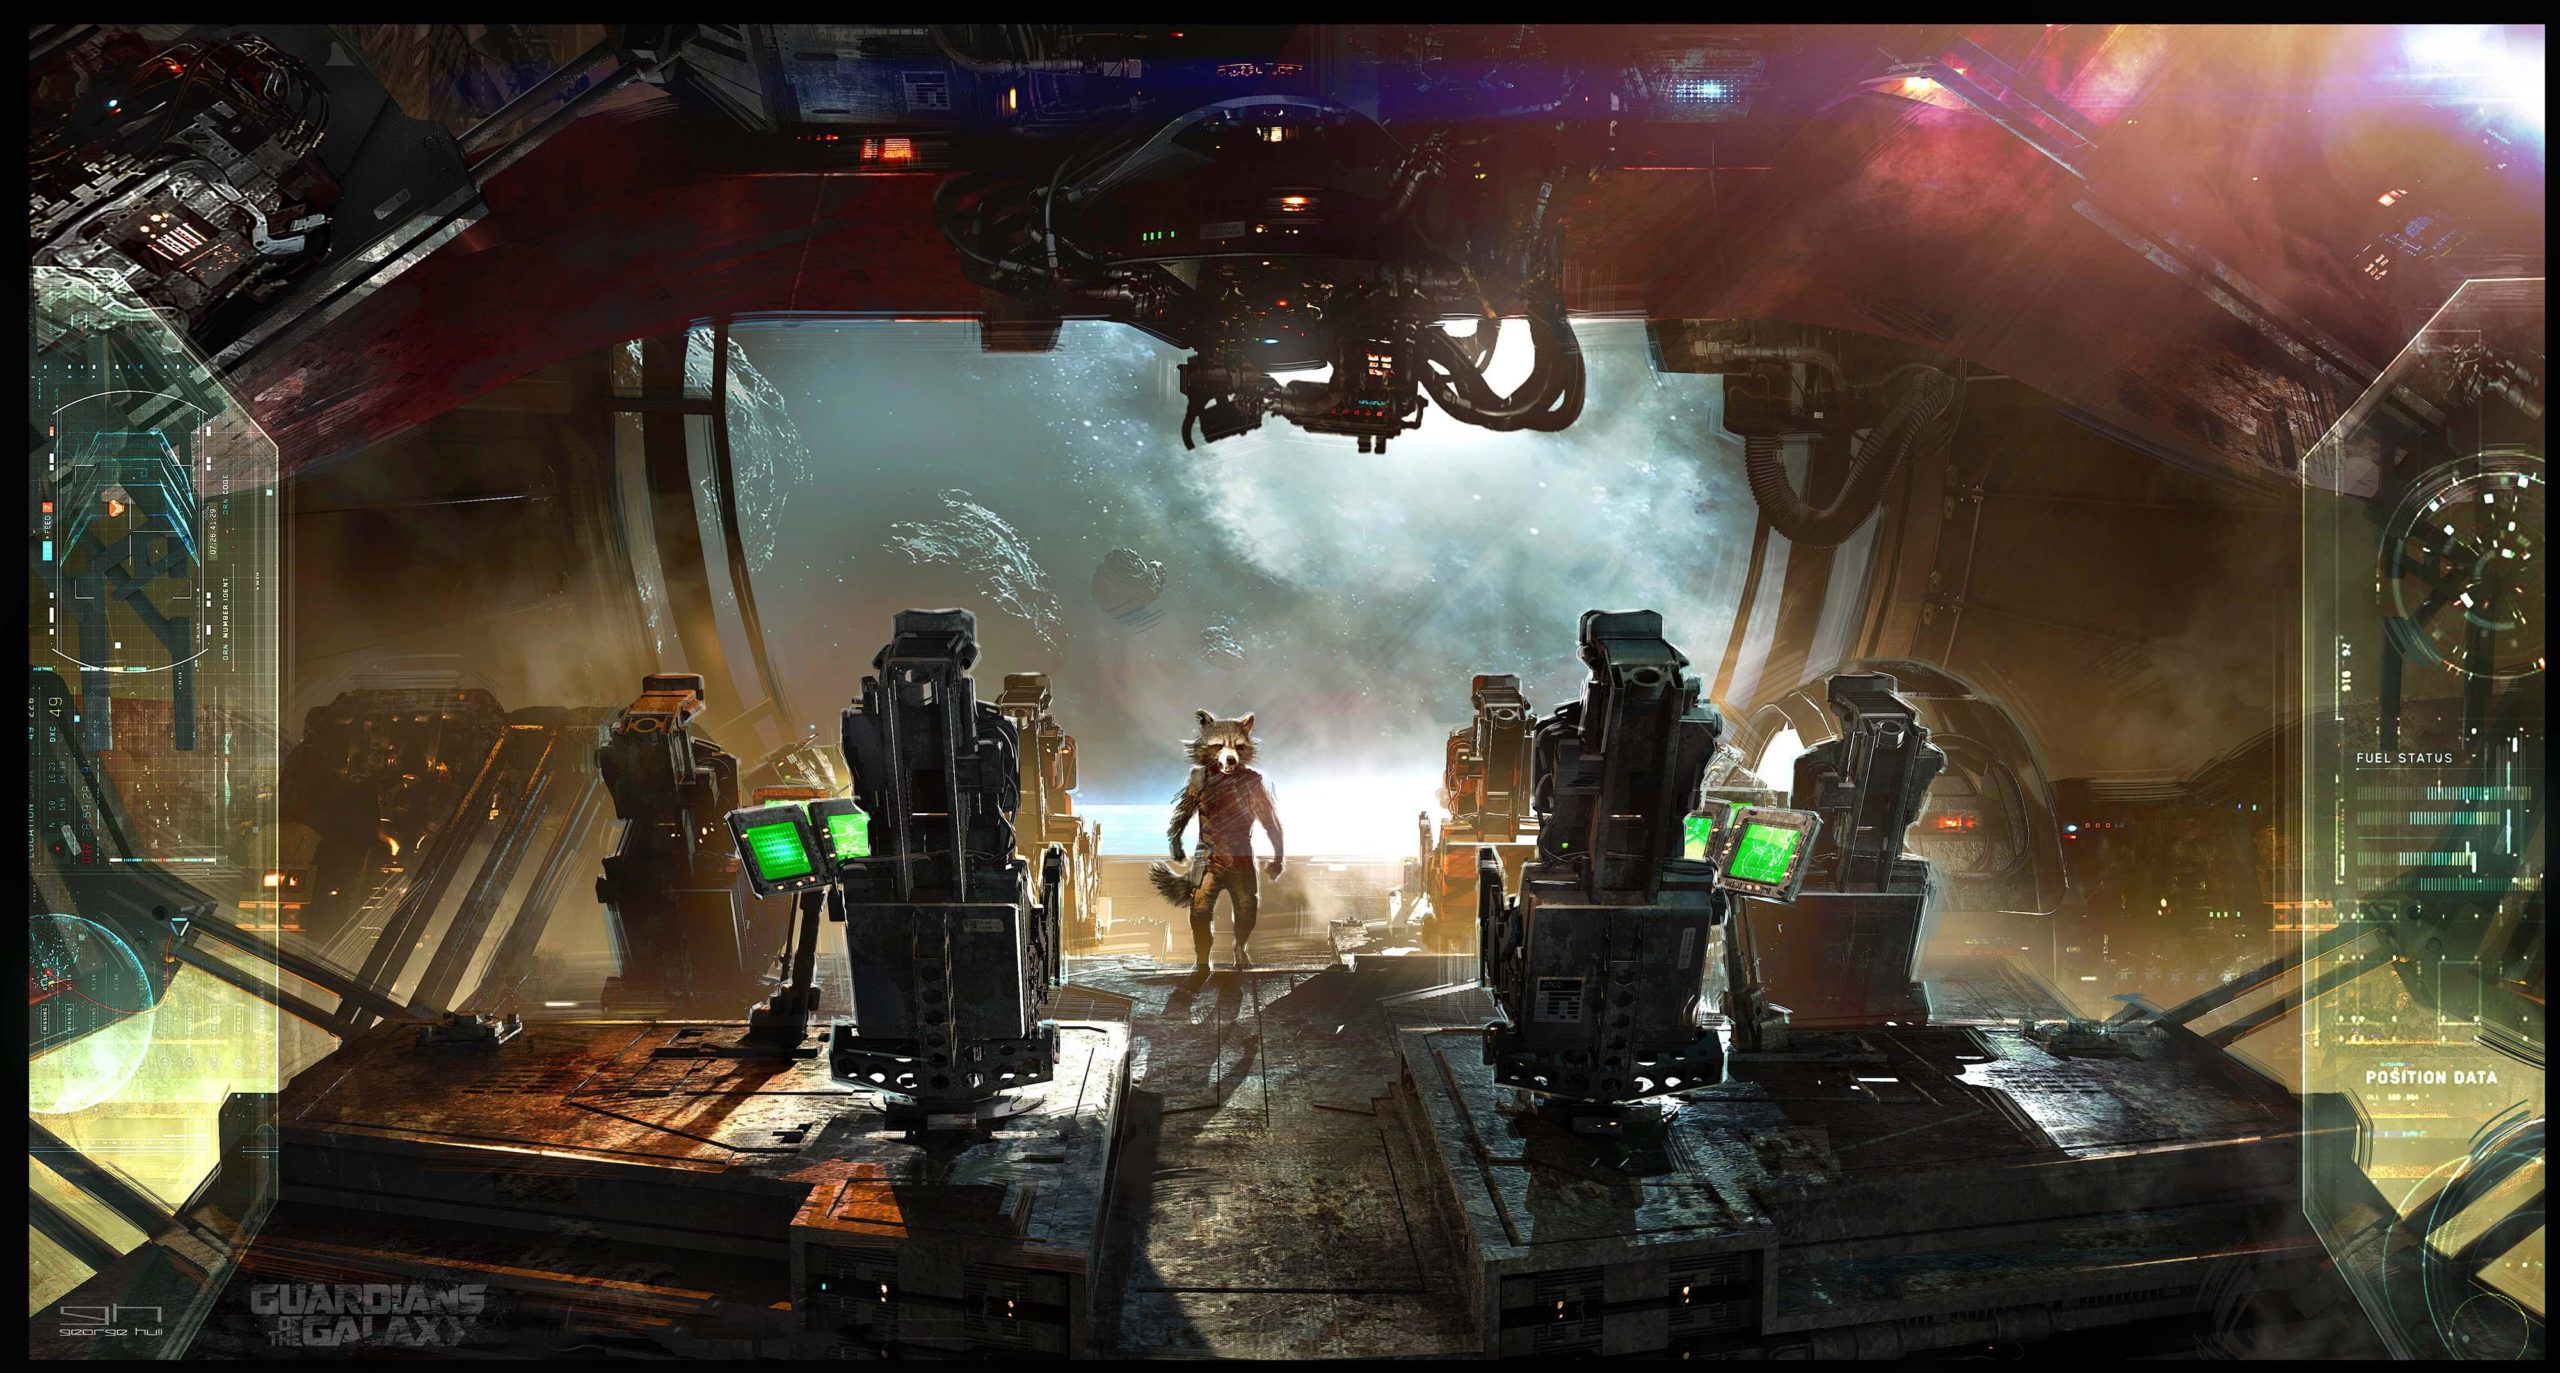 Check Out Fantastic Concept Art Of The New Ships In Guardians Of The Galaxy Vol. 2